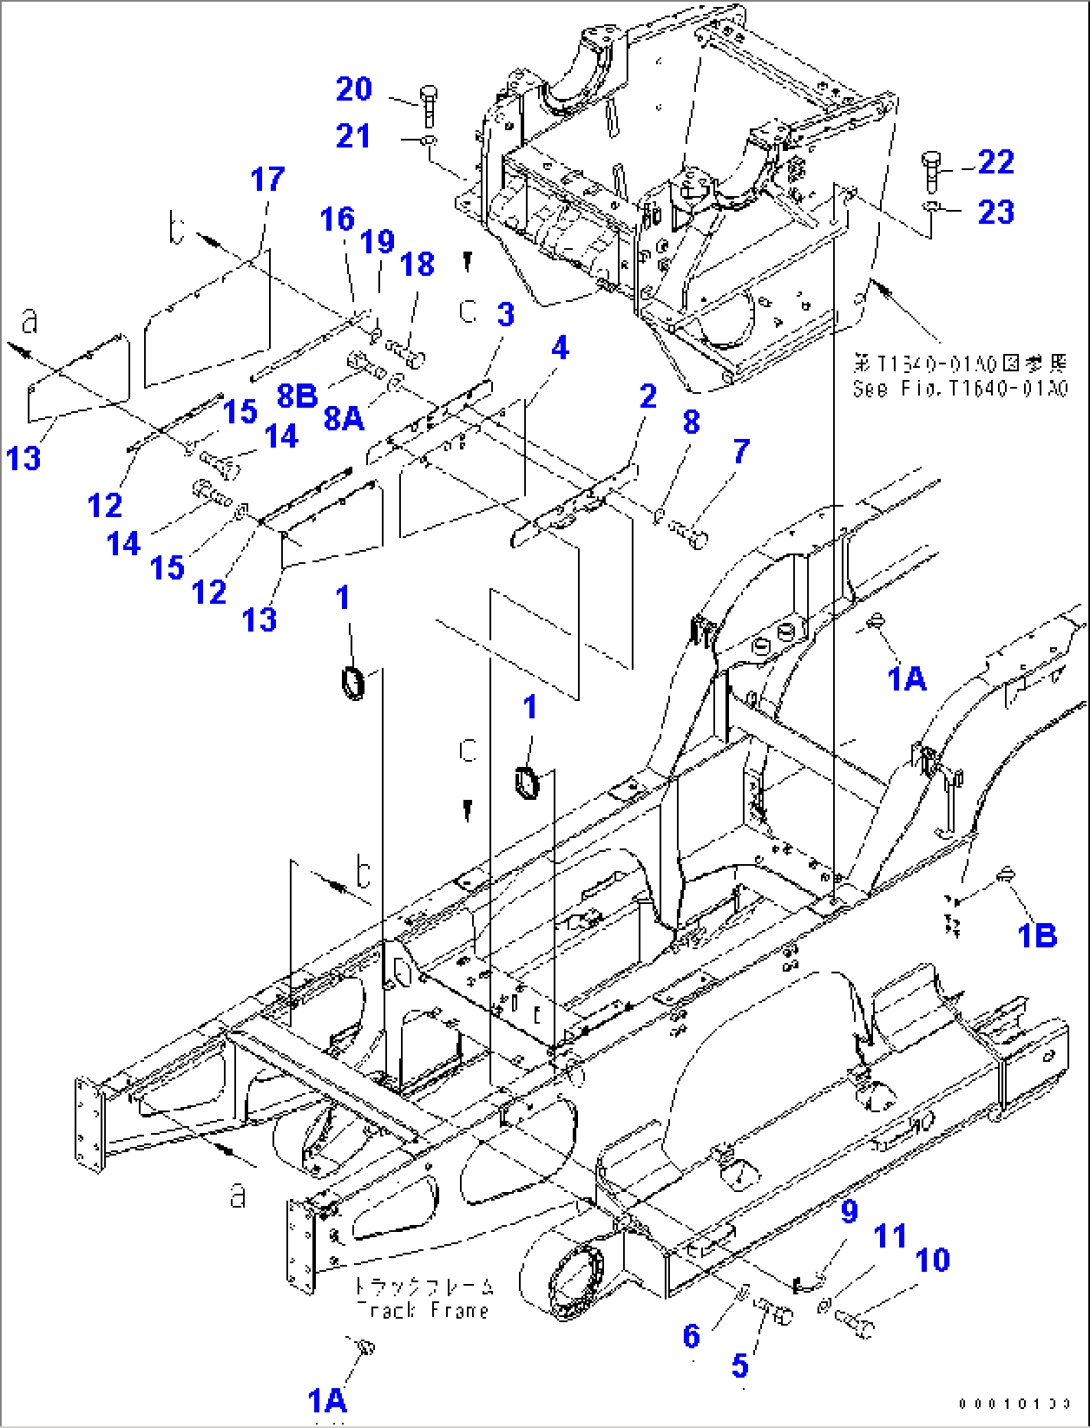 TRACK FRAME (COVER AND CRUSHER MOUNT)